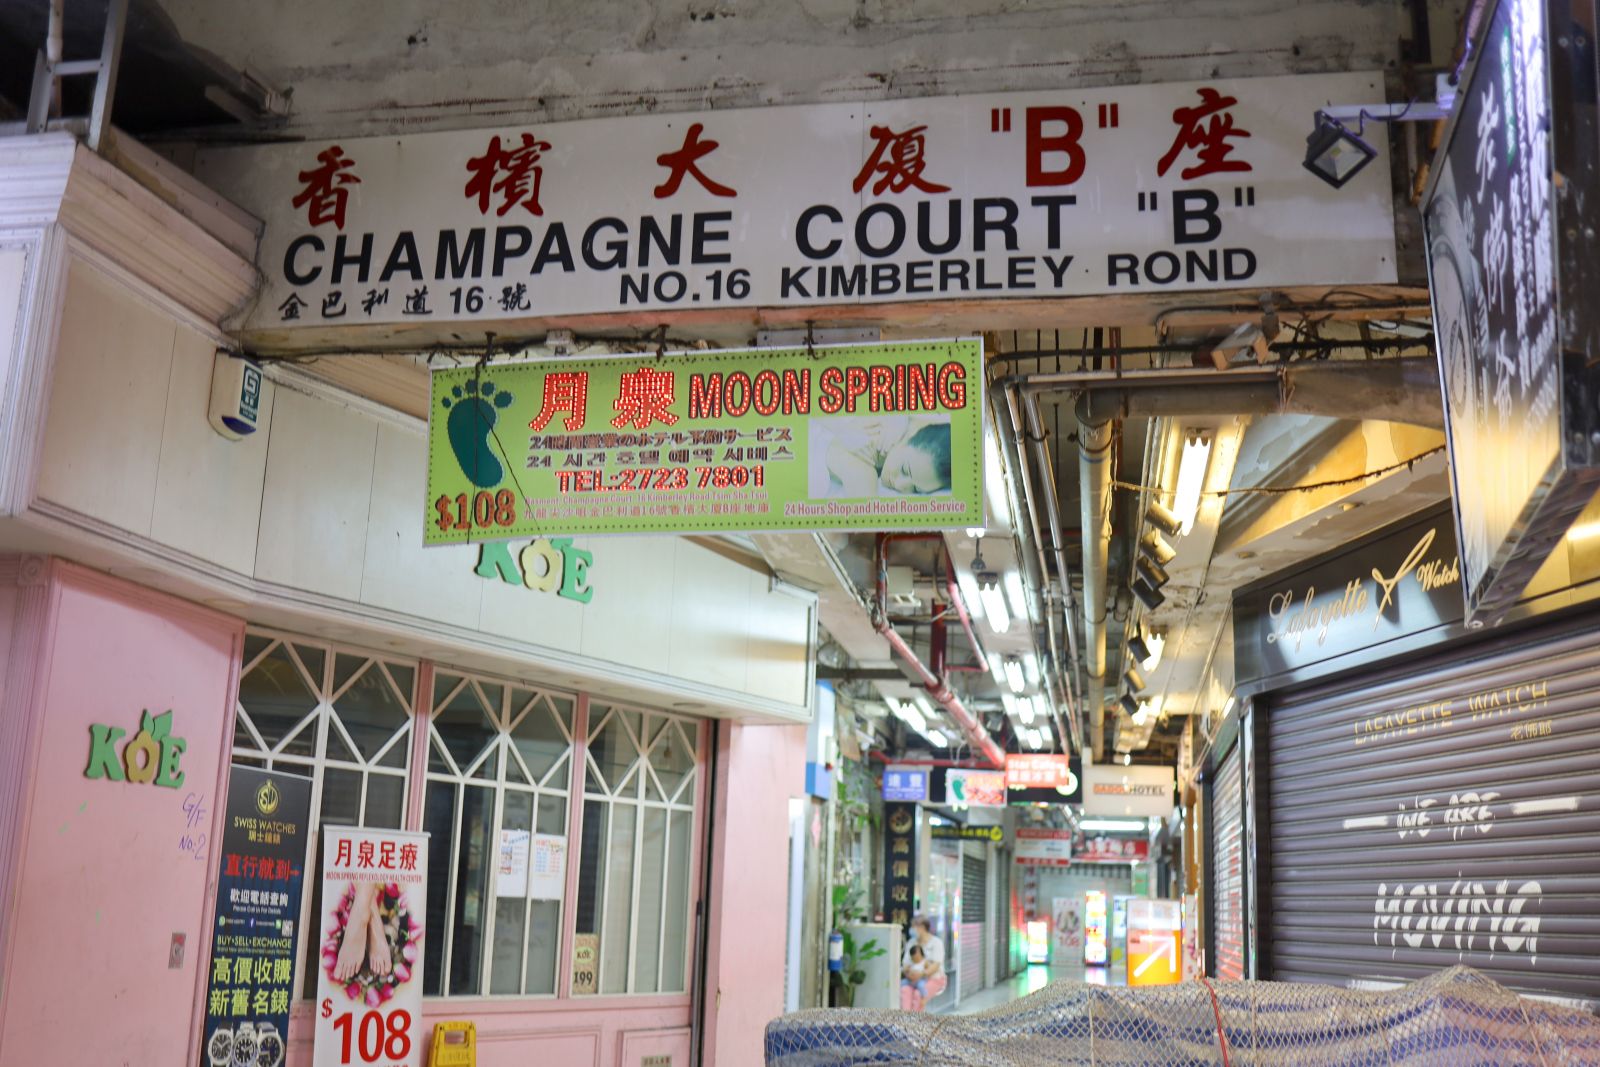 The place is a bit hard to find, first, you may find this sign of Champagne Court B 